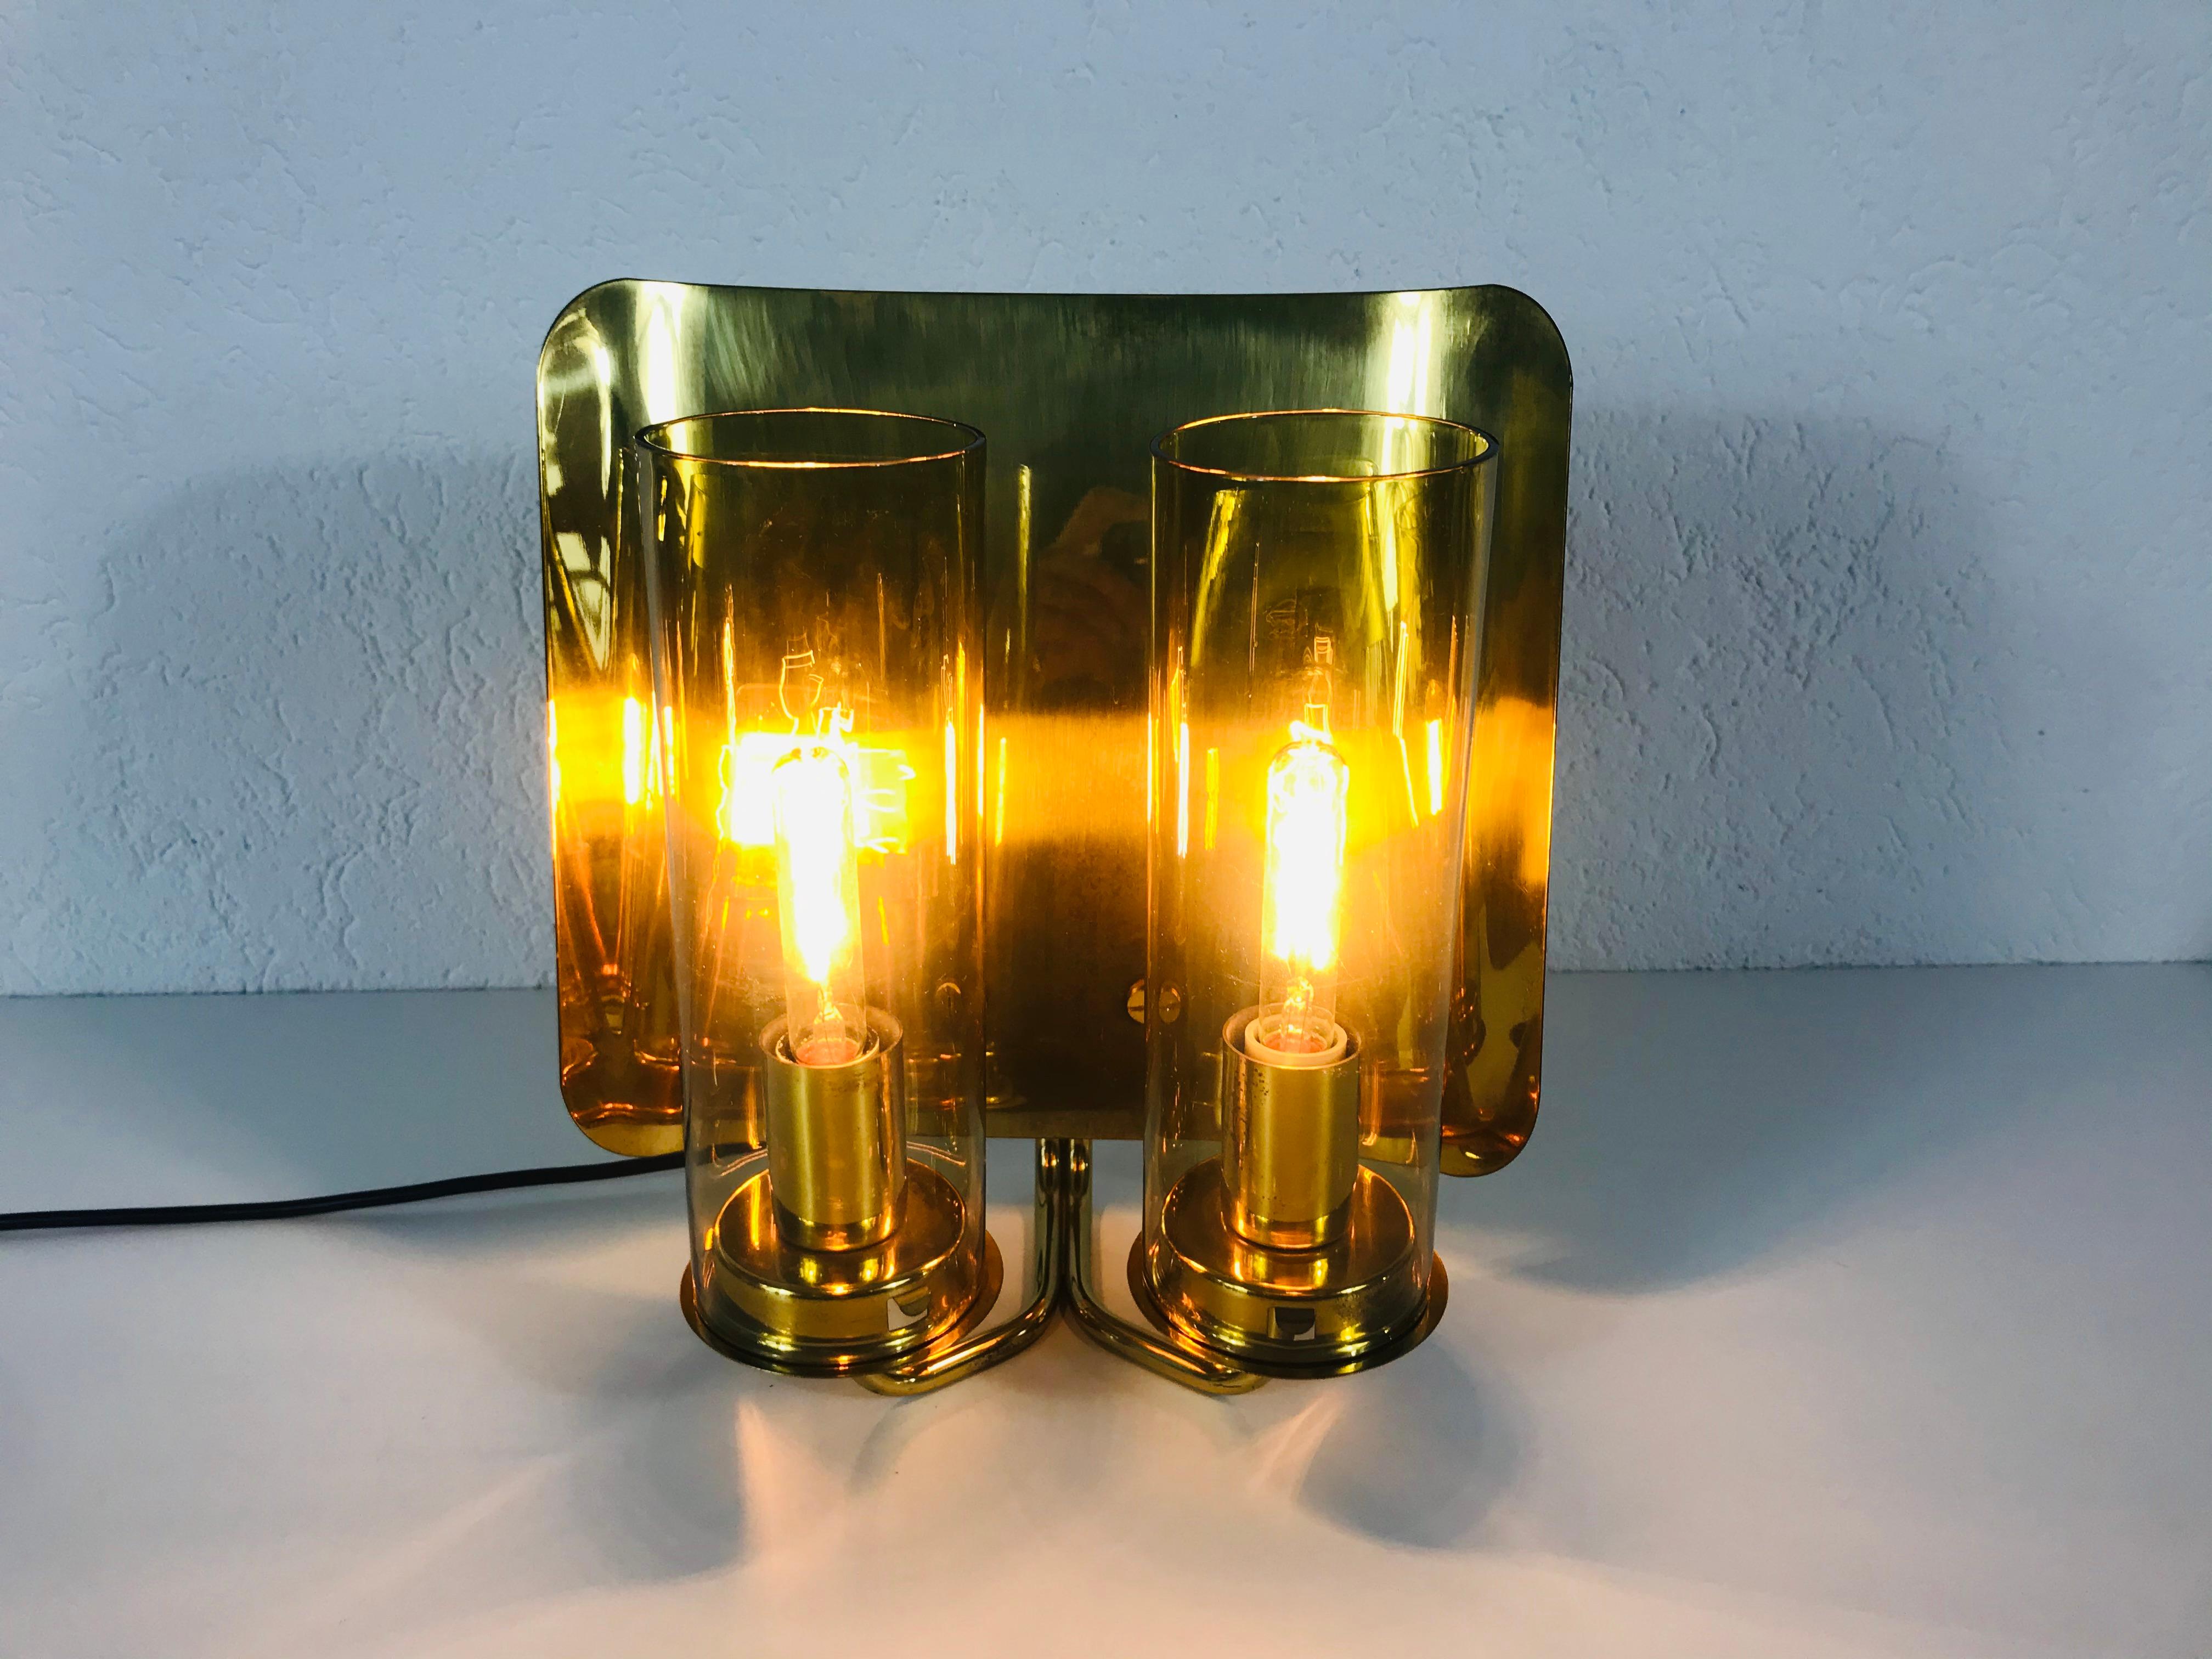 A beautiful pair of brass wall lamps made in Sweden in the 1960s. The pair has an amazing midcentury design. It is made of brass and amber glass and fits perfectly into a living room. The glass shade is very thin and elegant.

The light requires